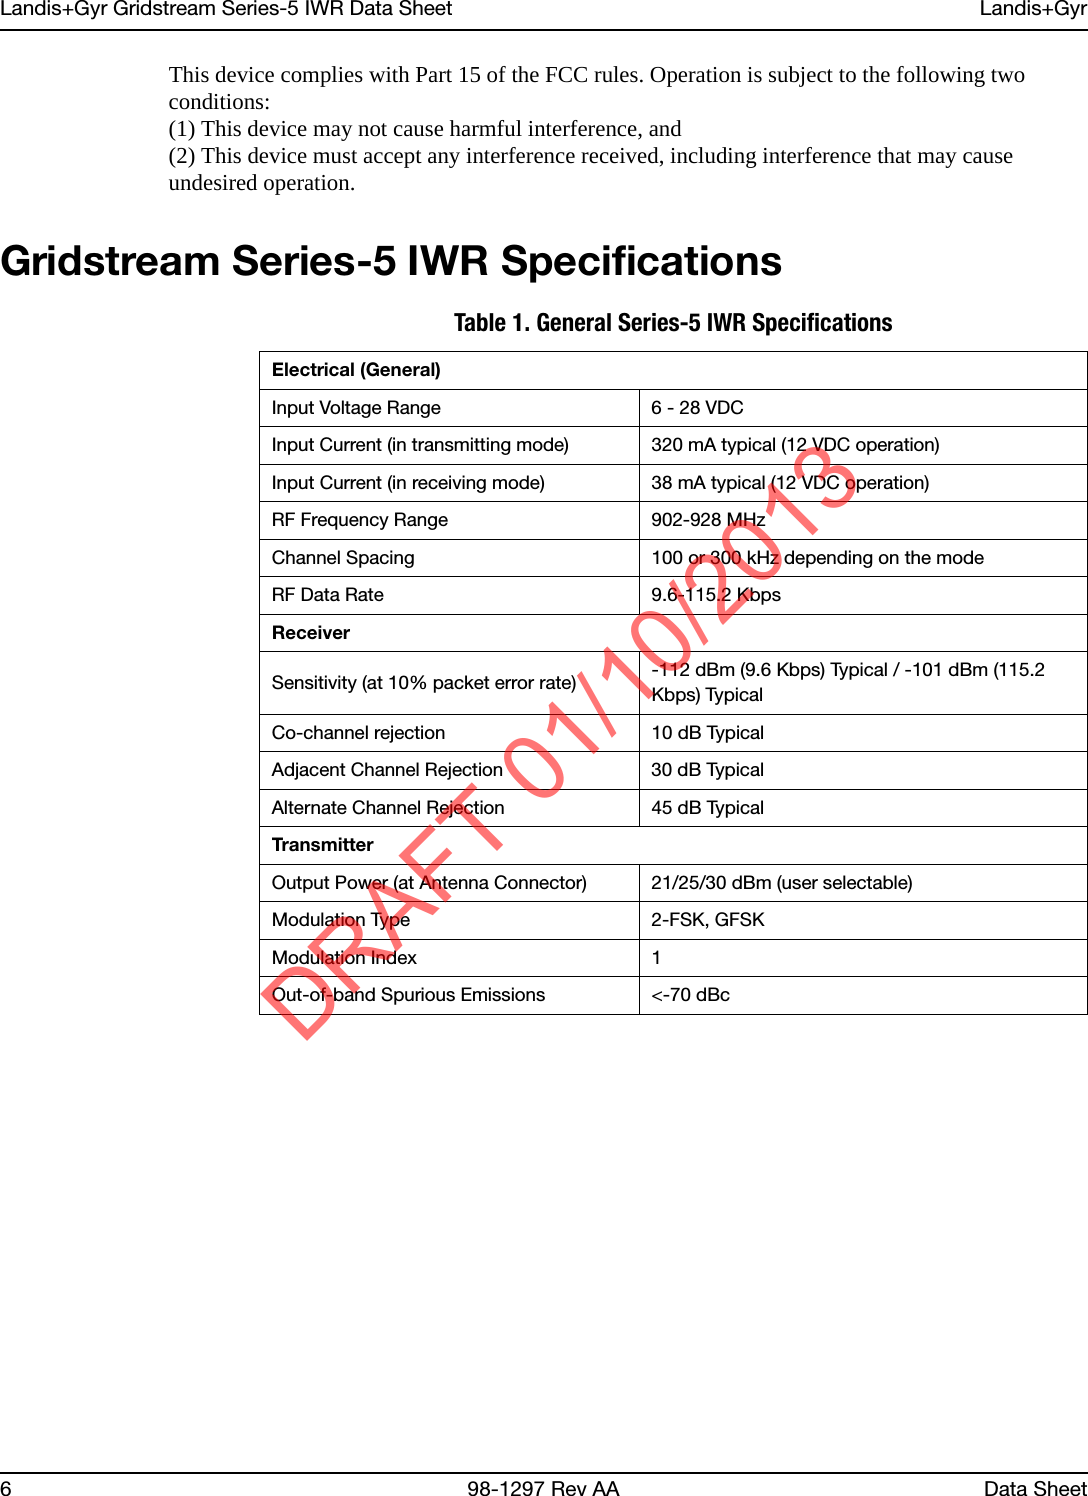 Landis+Gyr Gridstream Series-5 IWR Data Sheet Landis+Gyr6 98-1297 Rev AA Data SheetThis device complies with Part 15 of the FCC rules. Operation is subject to the following two conditions:(1) This device may not cause harmful interference, and(2) This device must accept any interference received, including interference that may cause undesired operation.Gridstream Series-5 IWR SpecificationsTable 1. General Series-5 IWR SpecificationsElectrical (General)Input Voltage Range 6 - 28 VDCInput Current (in transmitting mode) 320 mA typical (12 VDC operation)Input Current (in receiving mode) 38 mA typical (12 VDC operation)RF Frequency Range 902-928 MHzChannel Spacing 100 or 300 kHz depending on the modeRF Data Rate 9.6-115.2 KbpsReceiverSensitivity (at 10% packet error rate)  -112 dBm (9.6 Kbps) Typical / -101 dBm (115.2 Kbps) TypicalCo-channel rejection 10 dB TypicalAdjacent Channel Rejection 30 dB TypicalAlternate Channel Rejection 45 dB TypicalTransmitterOutput Power (at Antenna Connector) 21/25/30 dBm (user selectable)Modulation Type 2-FSK, GFSKModulation Index 1Out-of-band Spurious Emissions &lt;-70 dBcDRAFT 01/10/2013